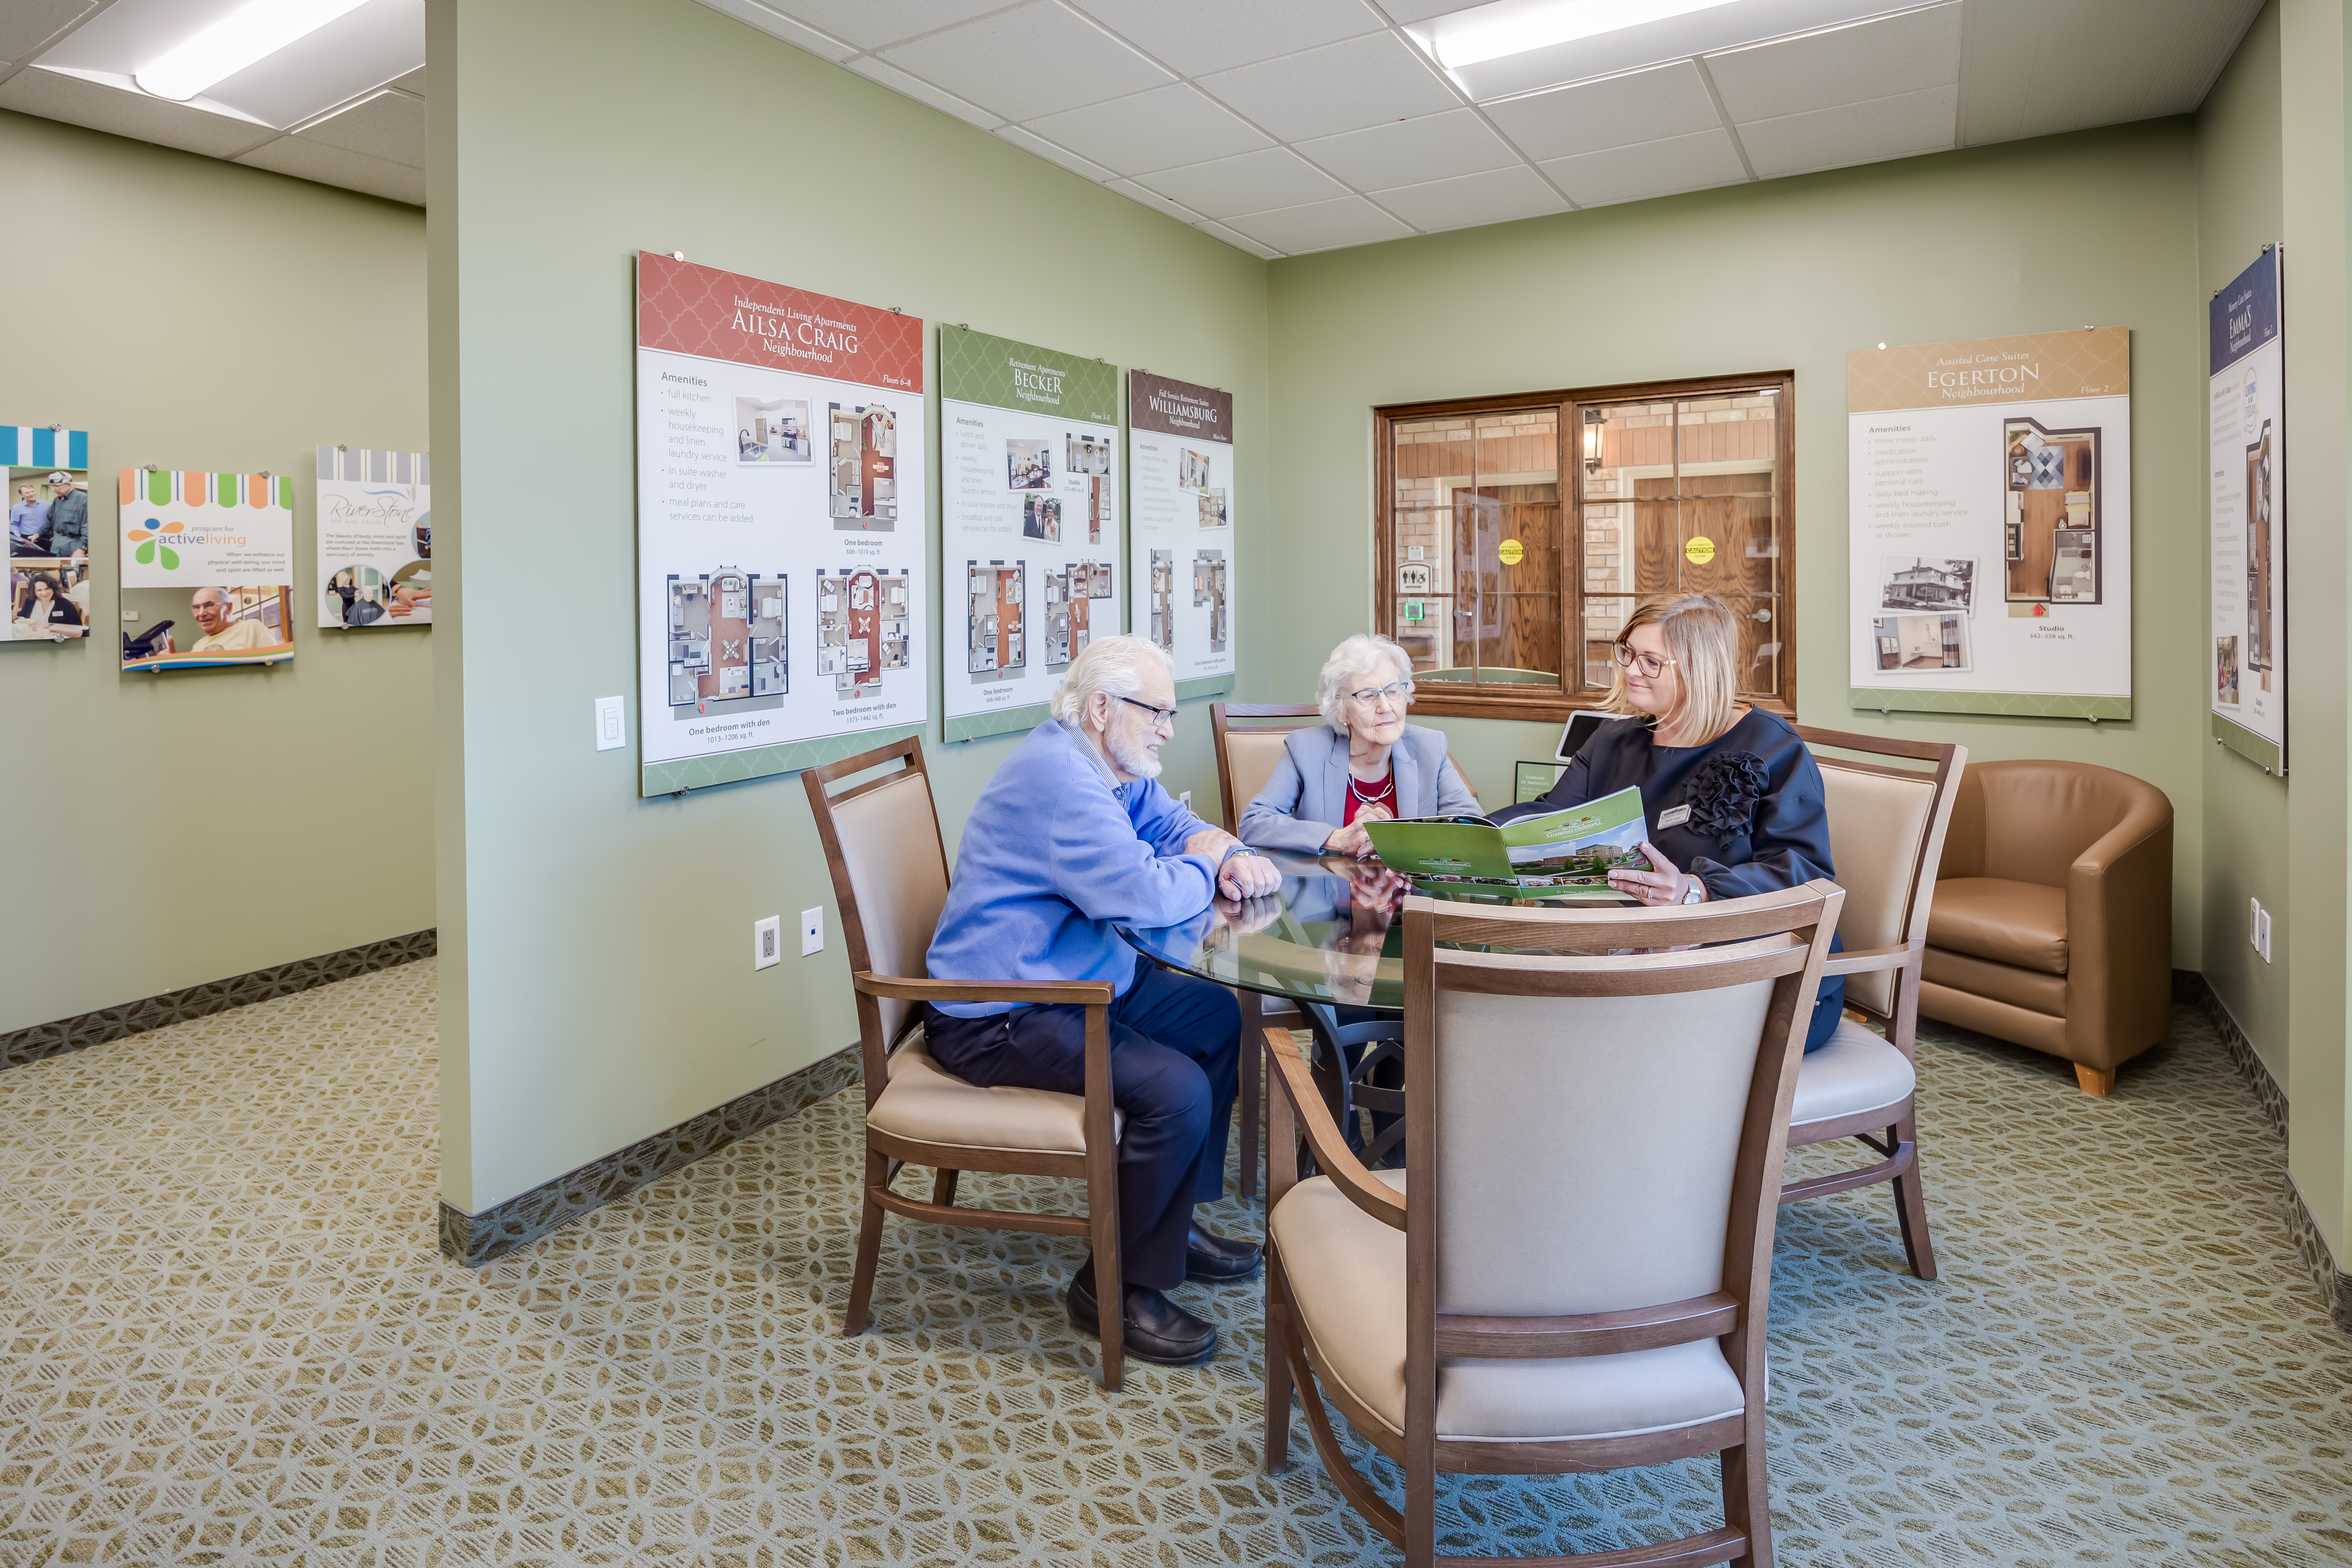 Director of Lifestyle Options meets with future resident in the Welcome Centre at The Village of Glendale Crossing